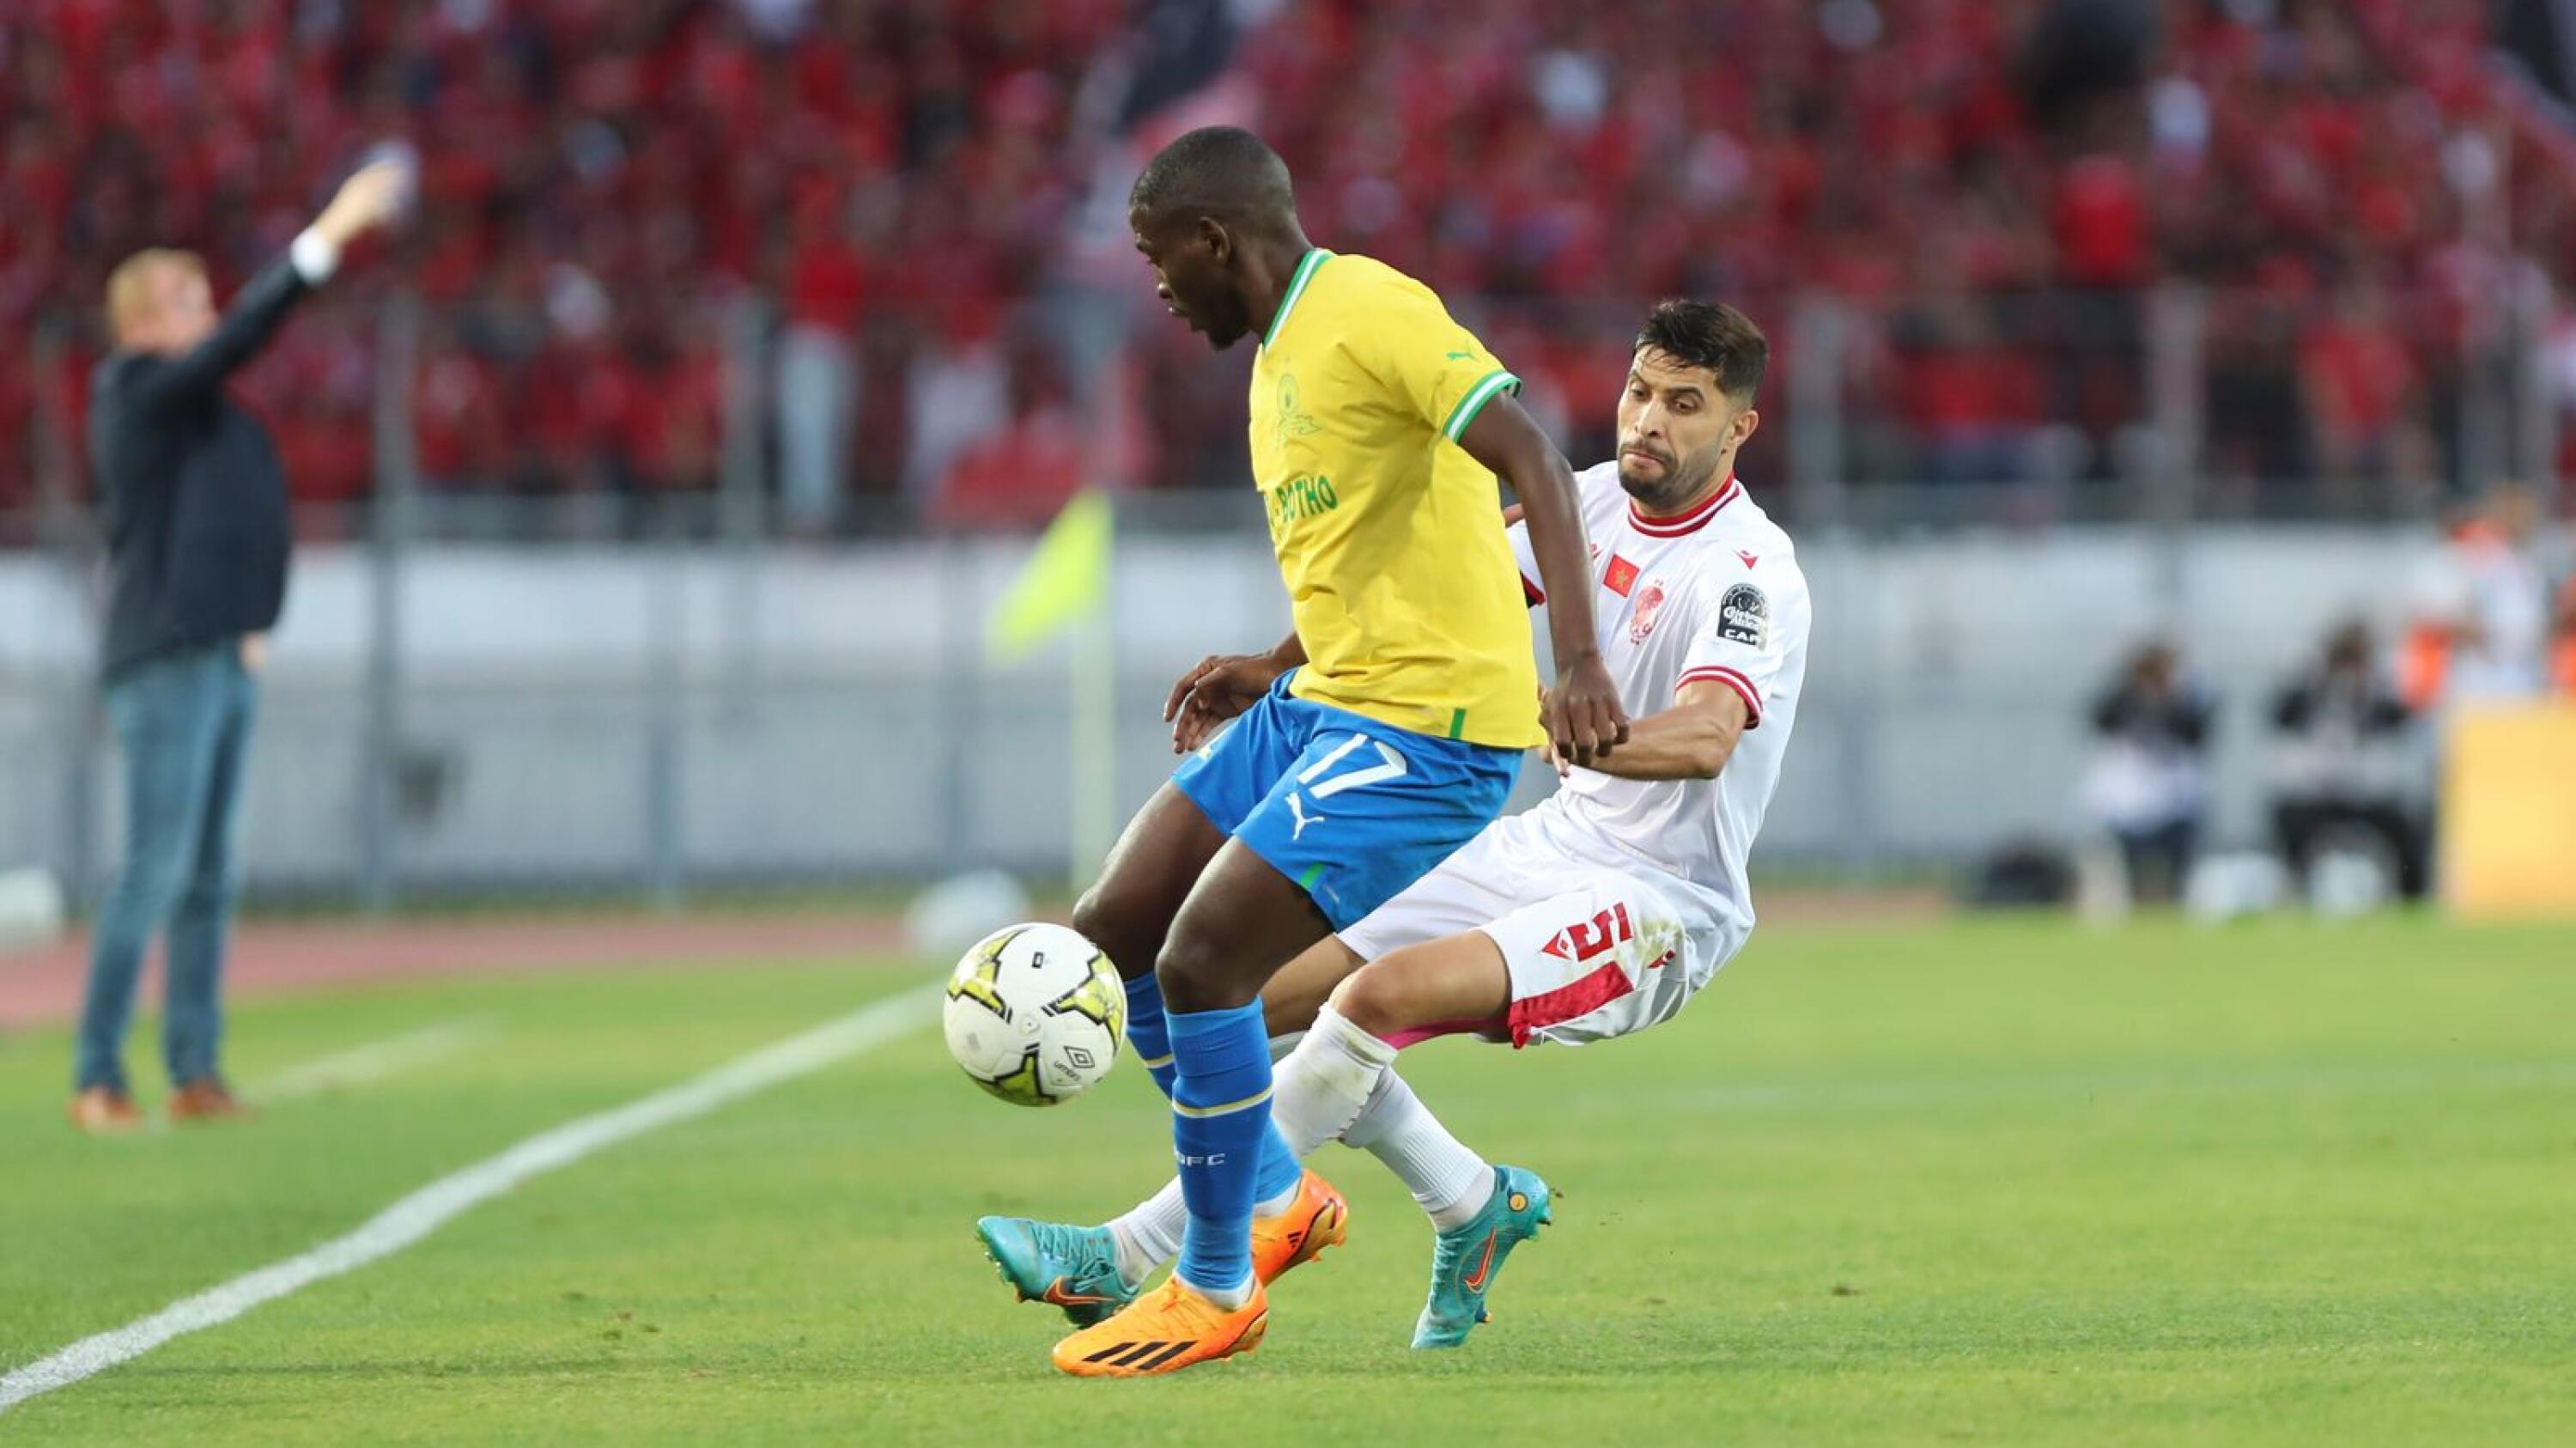 Aubrey Modiba of Sundowns is tackled by Yahya Jabrane of Wydad during their CAF Champions League semi-final, first leg at Mohammed V Stadium in Casablanca, Morocco on Saturday